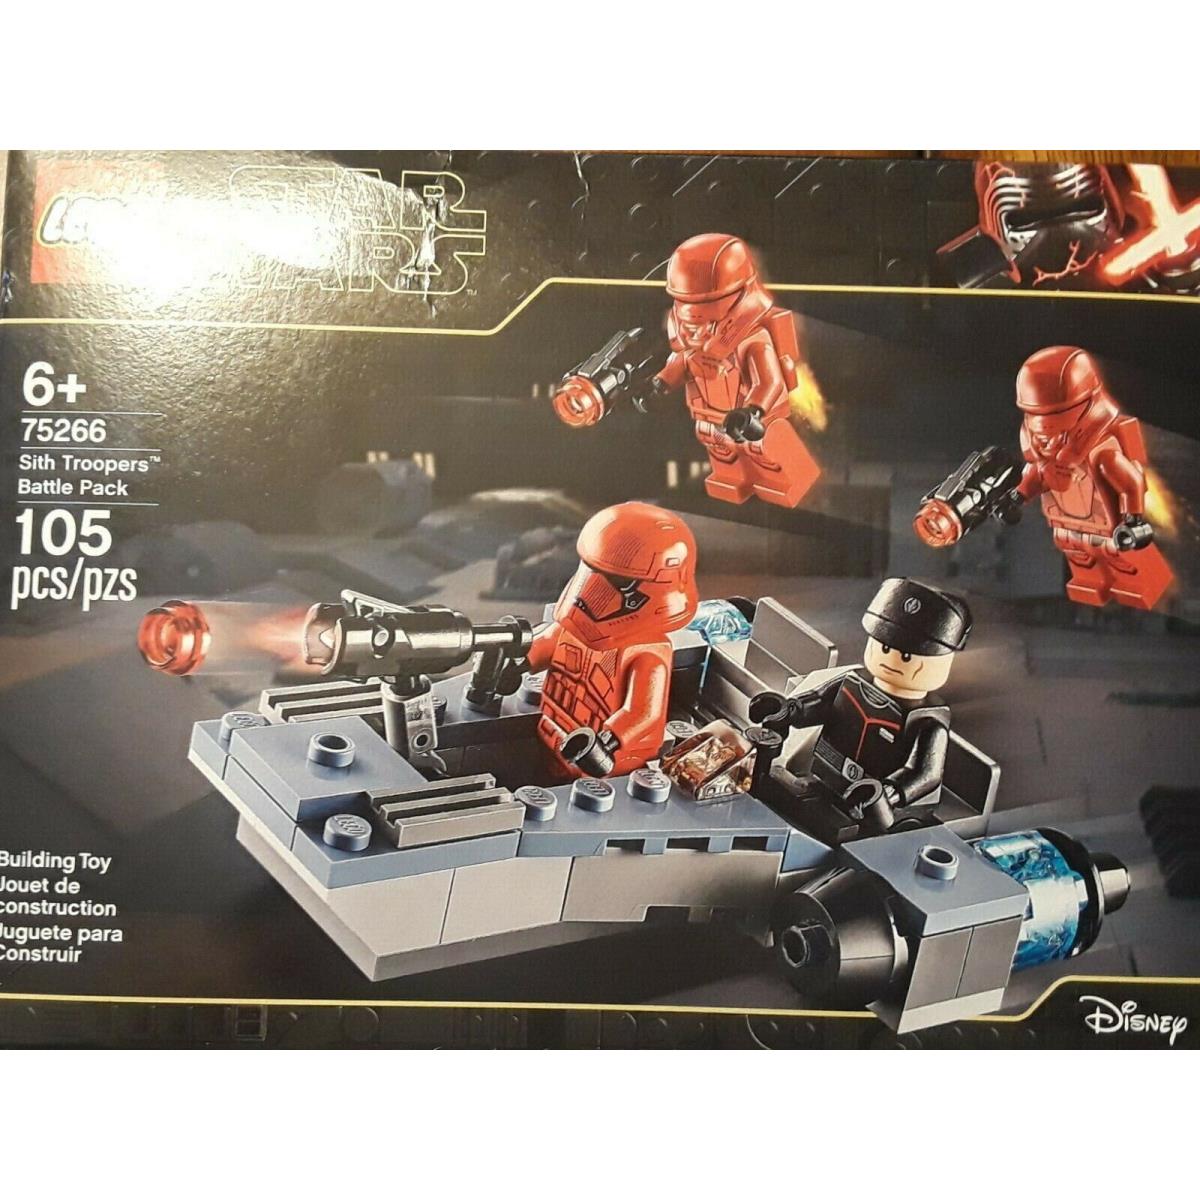 Lego Star Wars 75266 Sith Troopers Battle Pack New/ / Fast Free SH